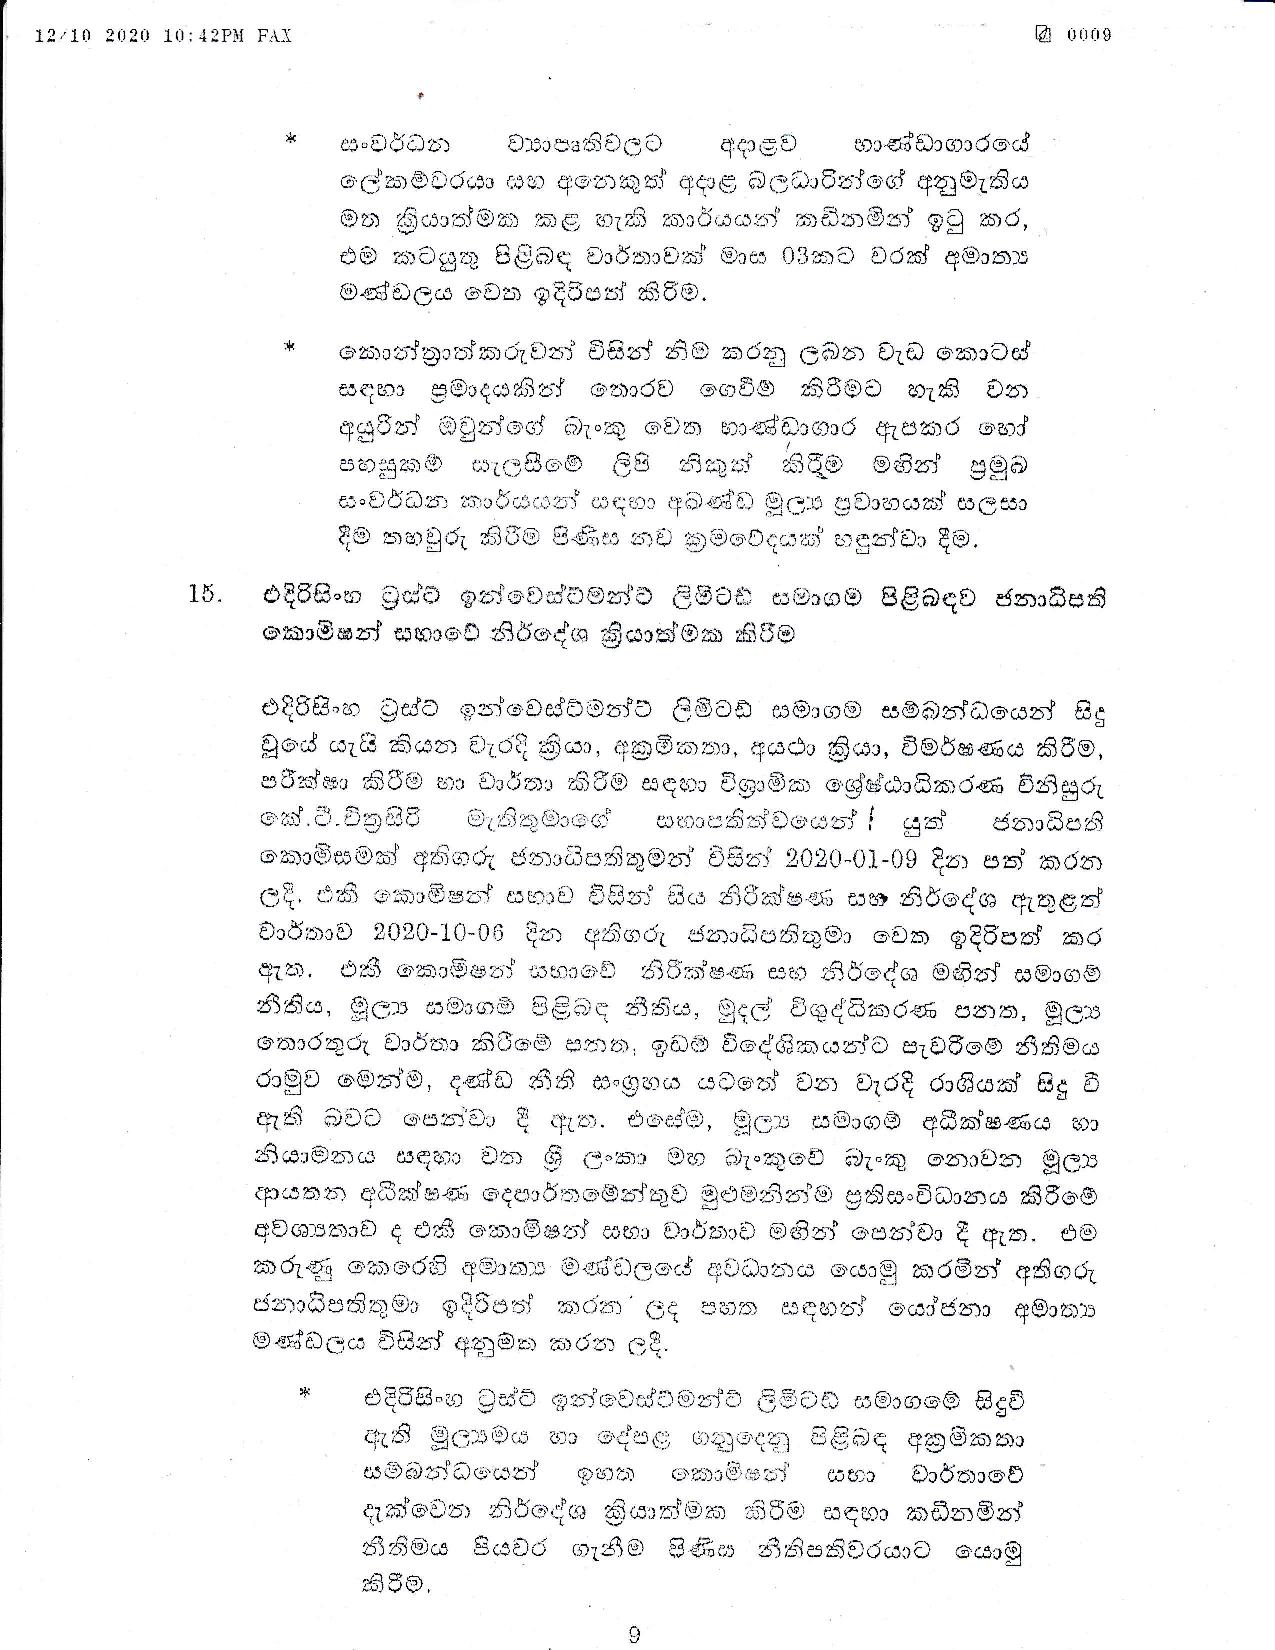 Cabinet Decision on 12.10.2020 page 009